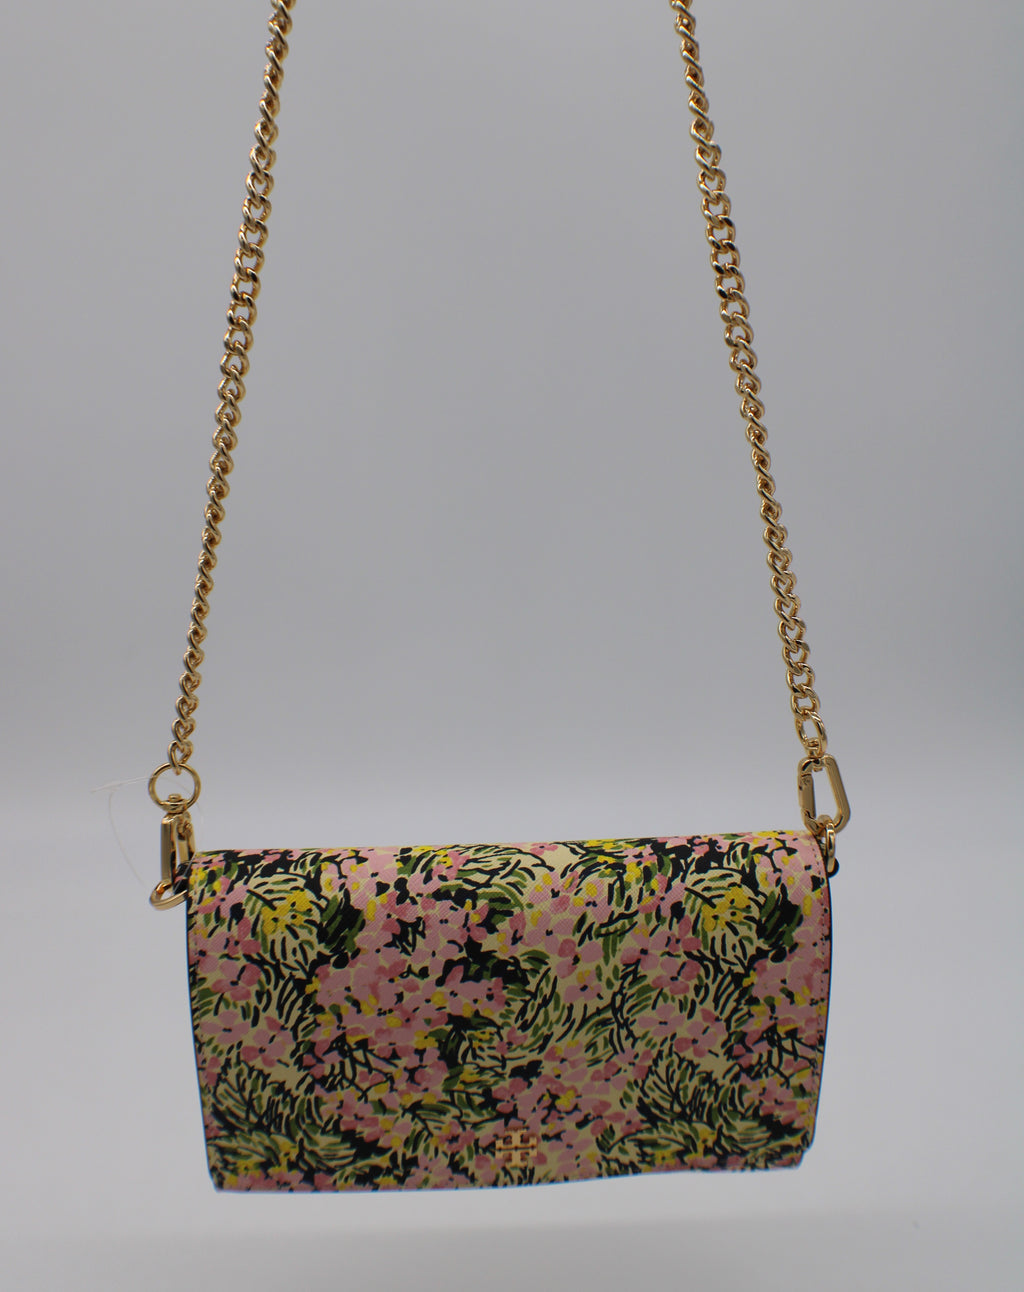 Tory Burch Emerson Printed Chain Crossbody Floral Bag.RET $395.00. AUTHENTIC